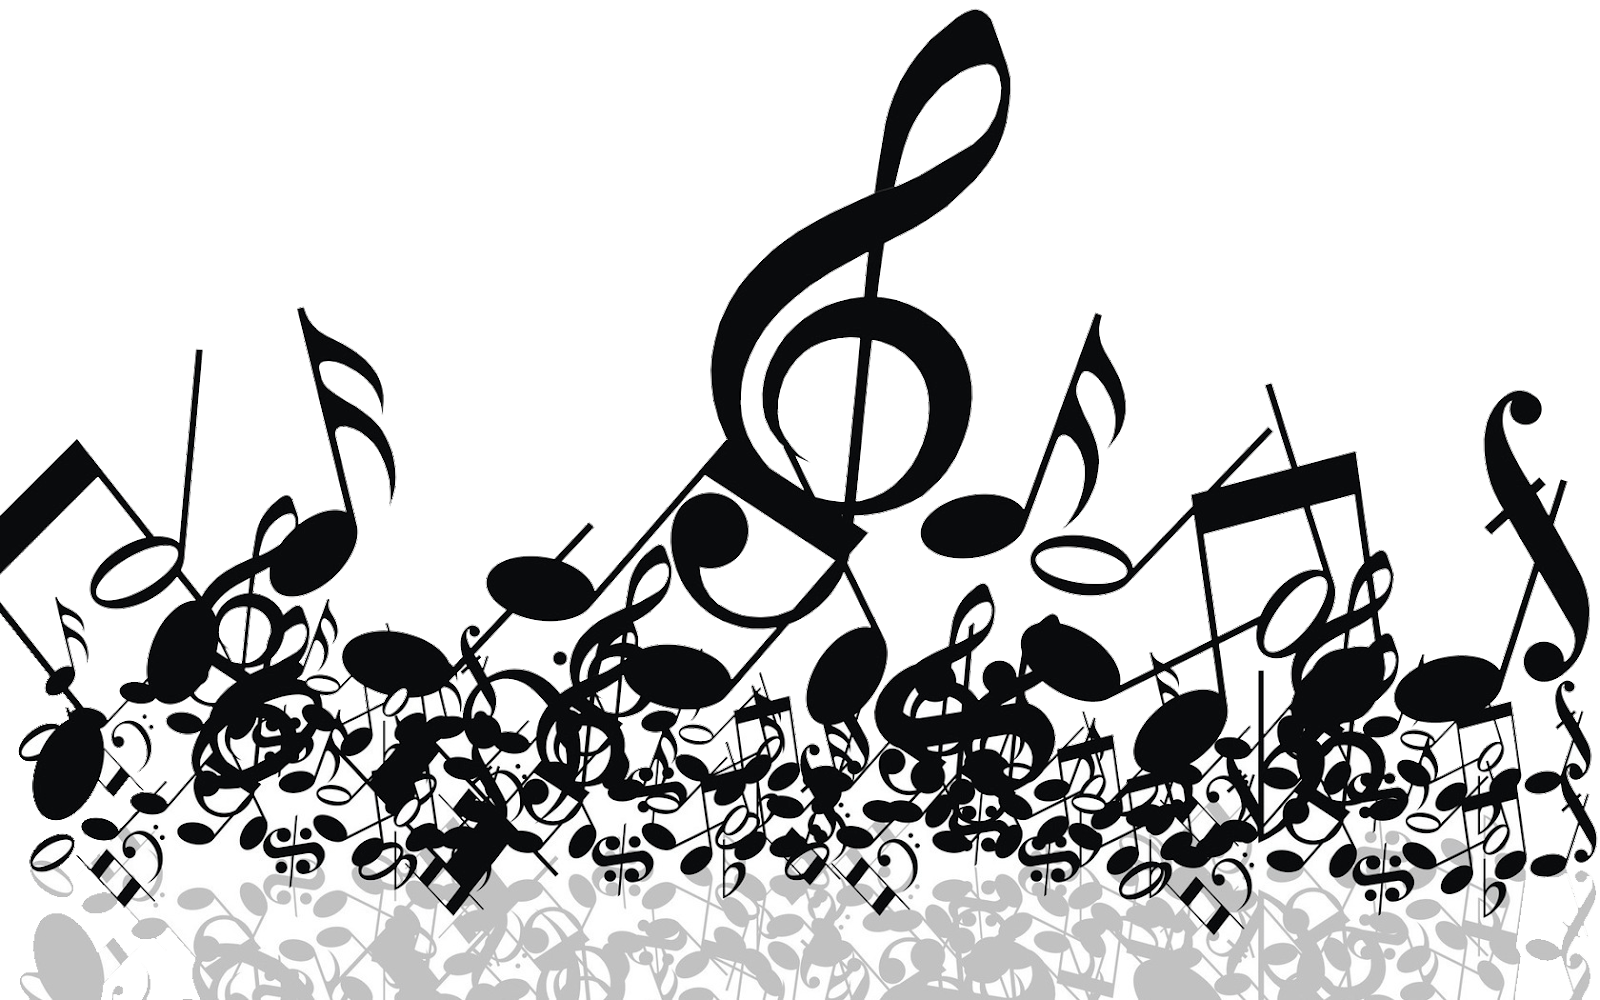 musician clipart elementary band